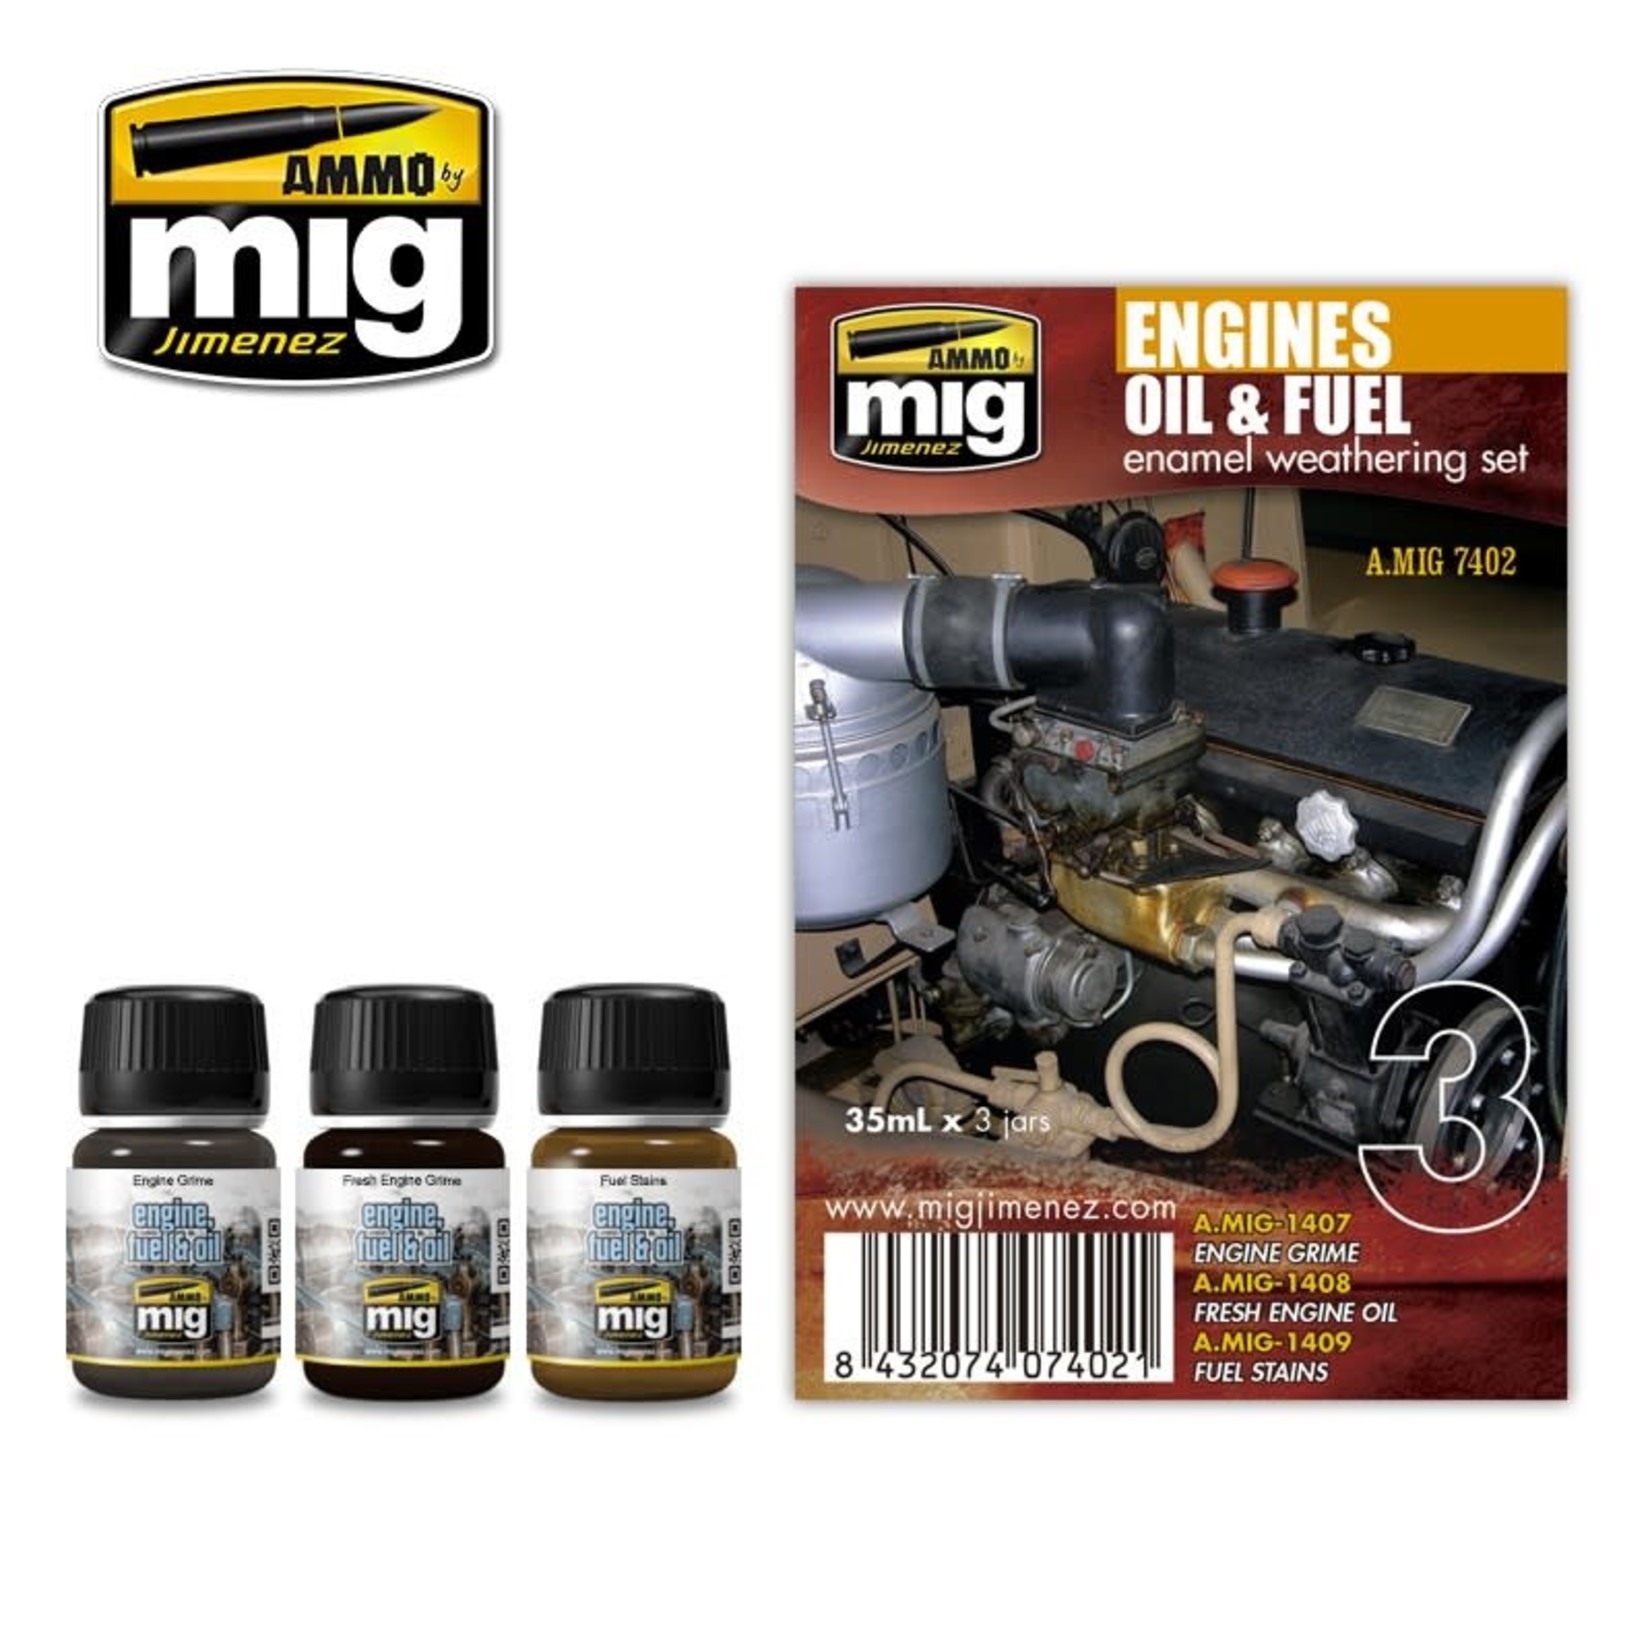 Ammo by Mig Jimenez A.MIG-7402 Engines Oil & Fuel Weathering (3) Set